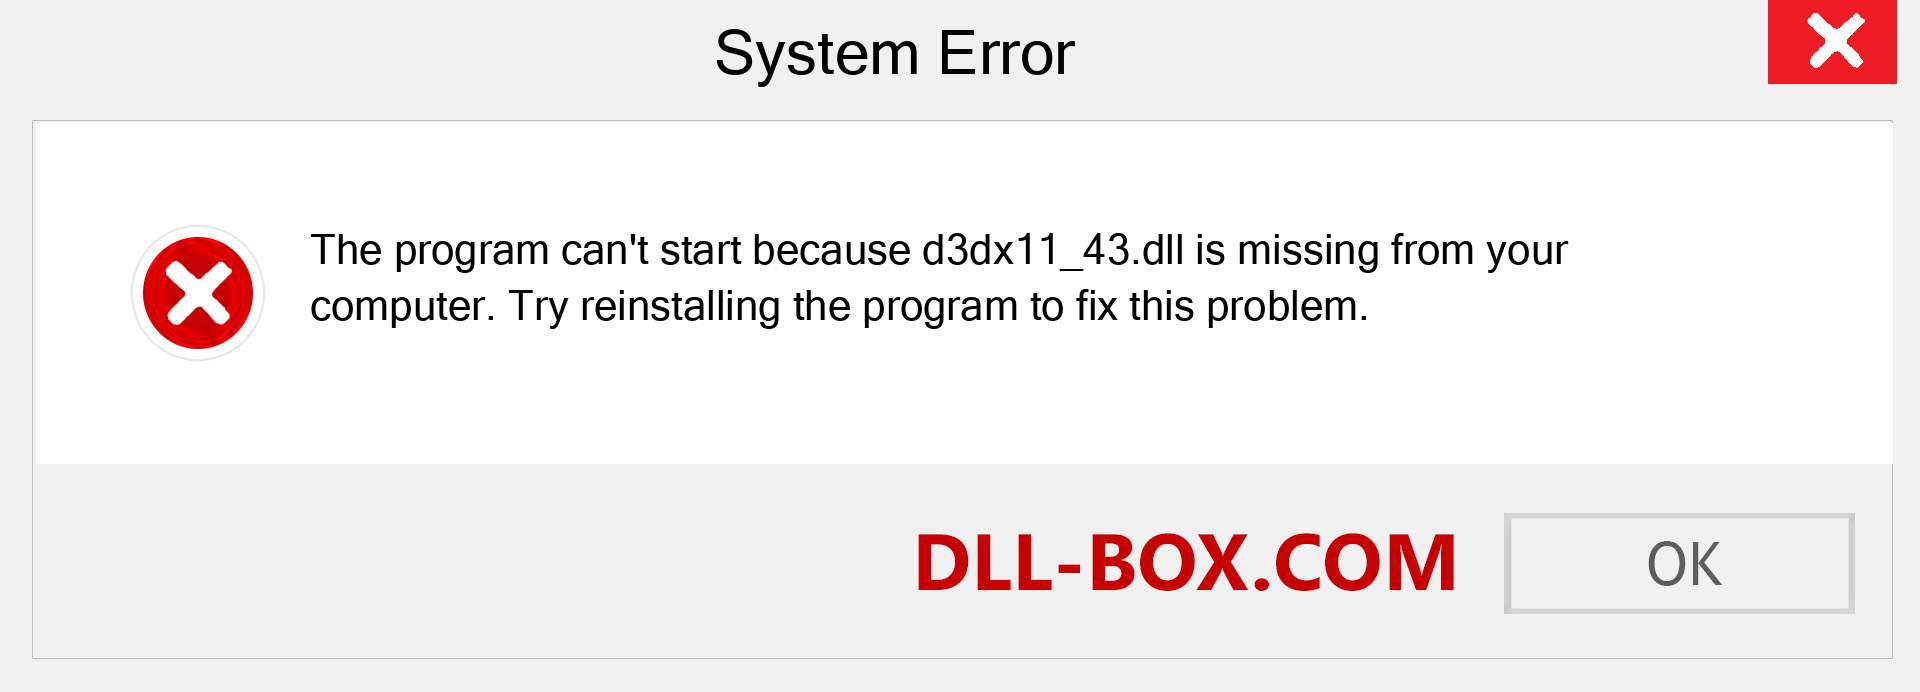  d3dx11_43.dll file is missing?. Download for Windows 7, 8, 10 - Fix  d3dx11_43 dll Missing Error on Windows, photos, images